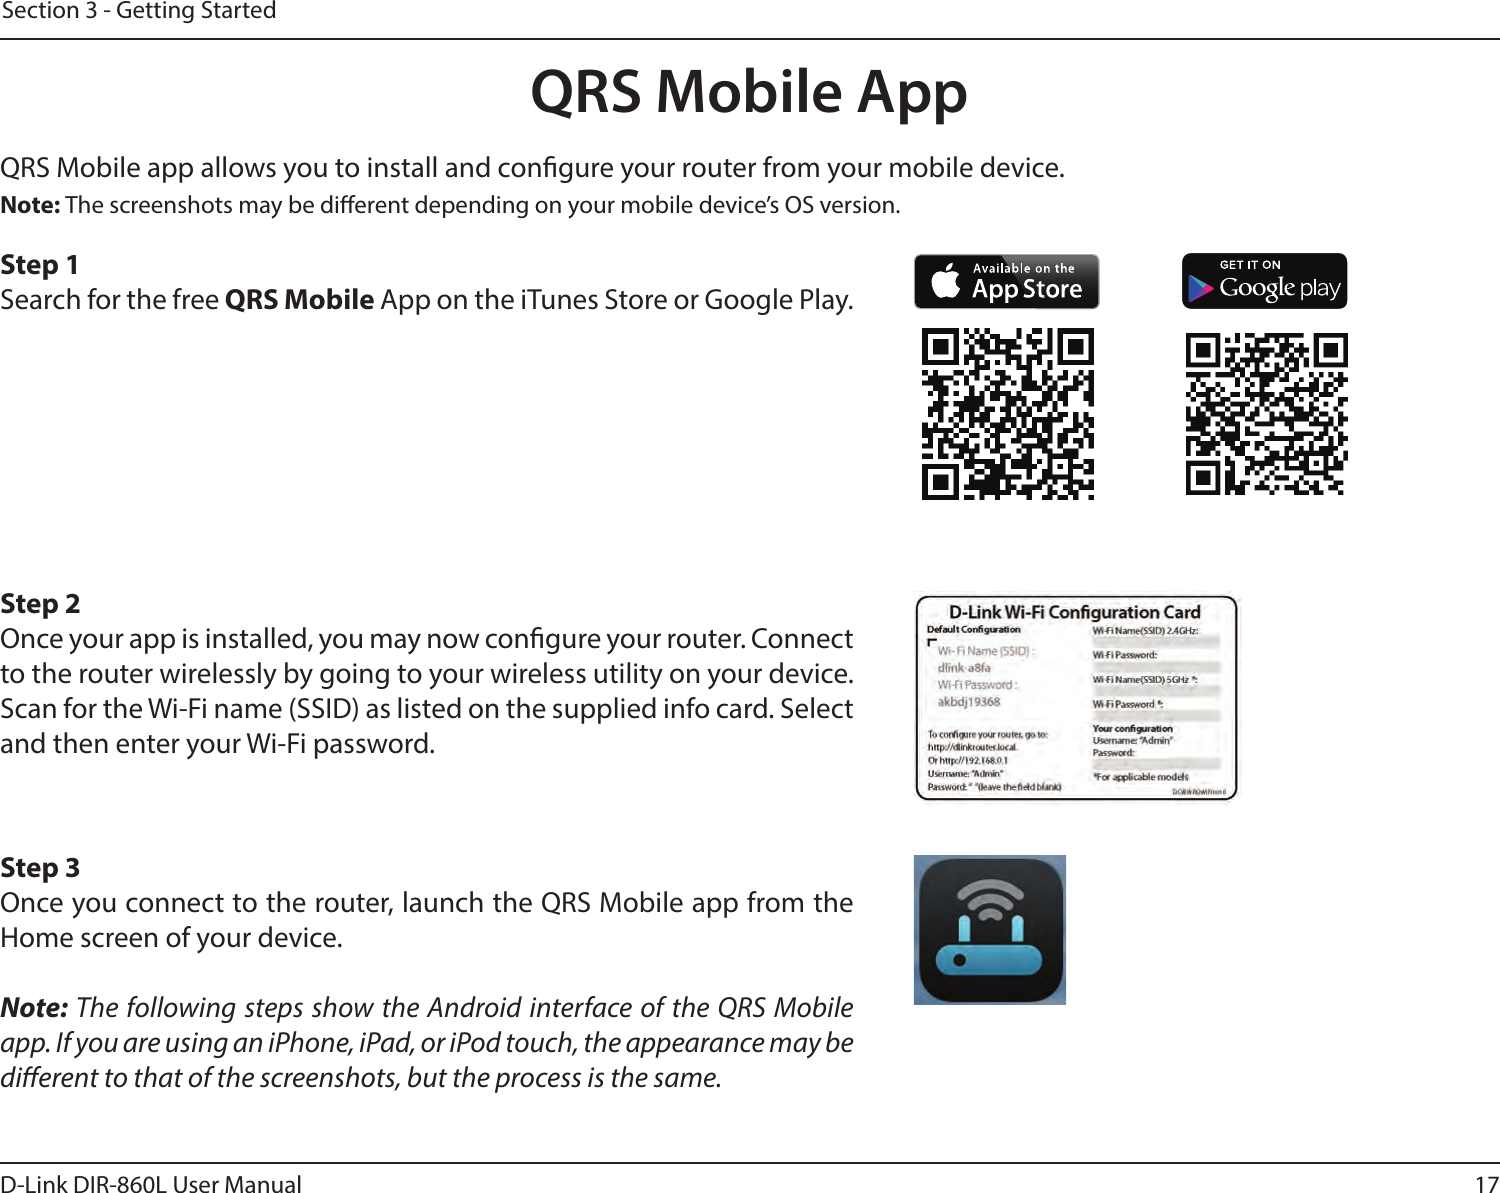 17D-Link DIR-860L User ManualSection 3 - Getting StartedQRS Mobile AppQRS Mobile app allows you to install and congure your router from your mobile device. Step 1Search for the free QRS Mobile App on the iTunes Store or Google Play.Step 2Once your app is installed, you may now congure your router. Connect to the router wirelessly by going to your wireless utility on your device. Scan for the Wi-Fi name (SSID) as listed on the supplied info card. Select and then enter your Wi-Fi password.Step 3Once you connect to the router, launch the QRS Mobile app from the Home screen of your device.Note: The following steps show the Android interface of the QRS Mobile app. If you are using an iPhone, iPad, or iPod touch, the appearance may be dierent to that of the screenshots, but the process is the same.Note: The screenshots may be dierent depending on your mobile device’s OS version.